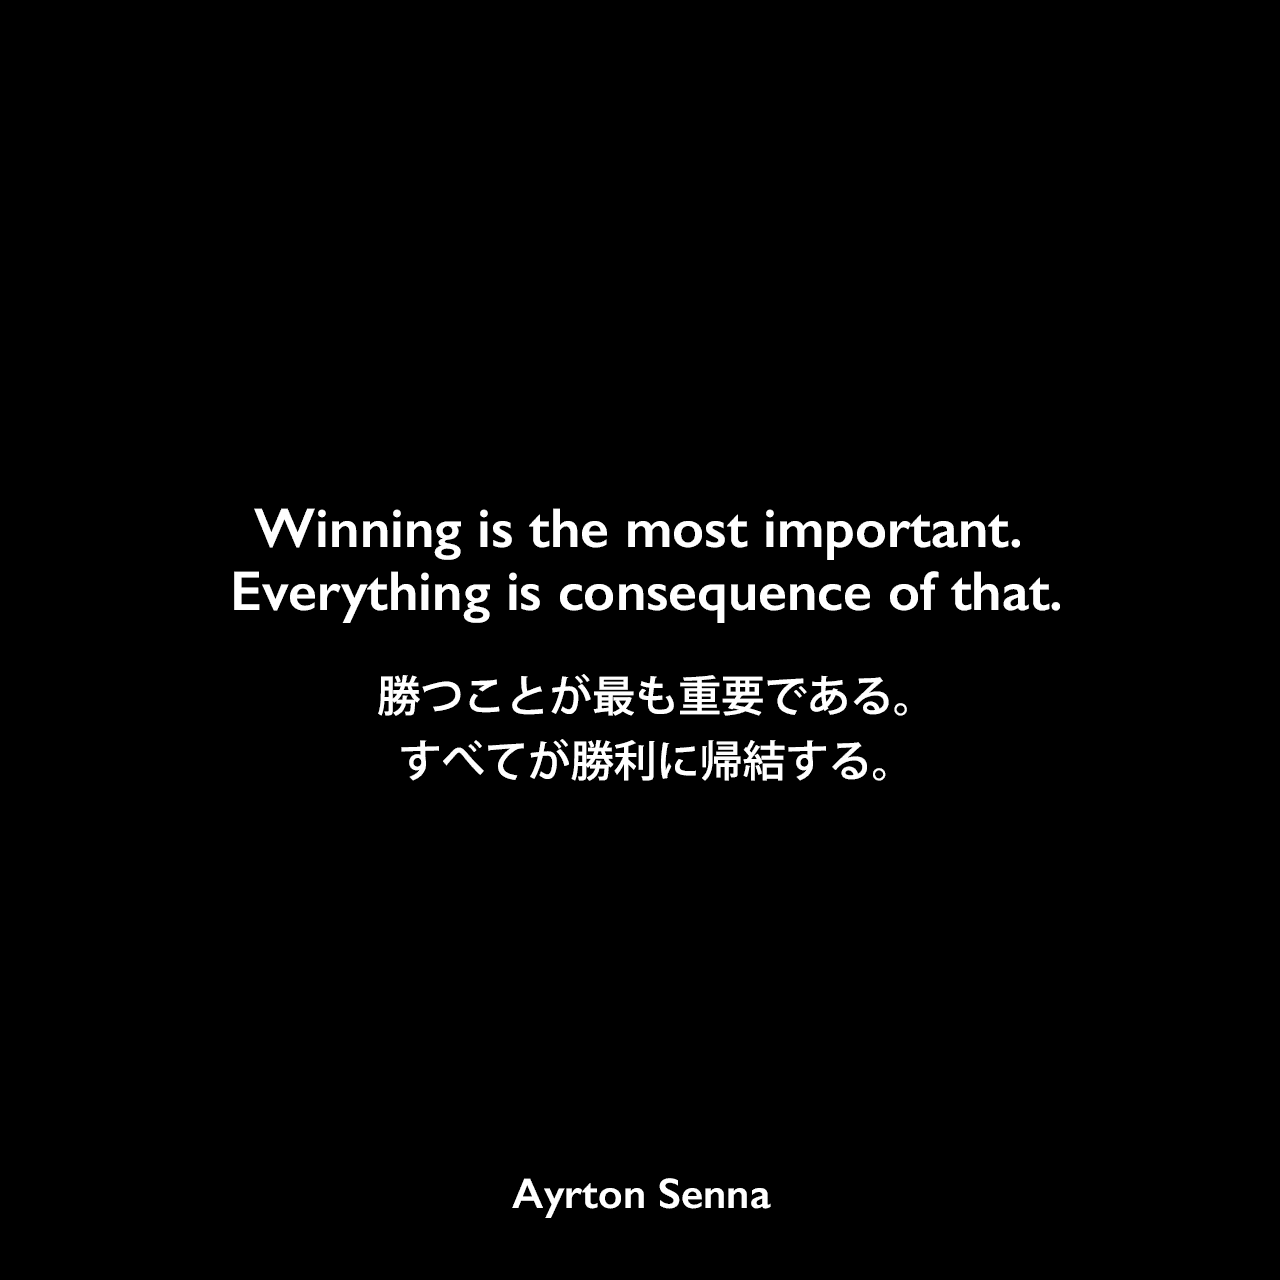 Winning is the most important. Everything is consequence of that.勝つことが最も重要である。すべてが勝利に帰結する。Ayrton Senna